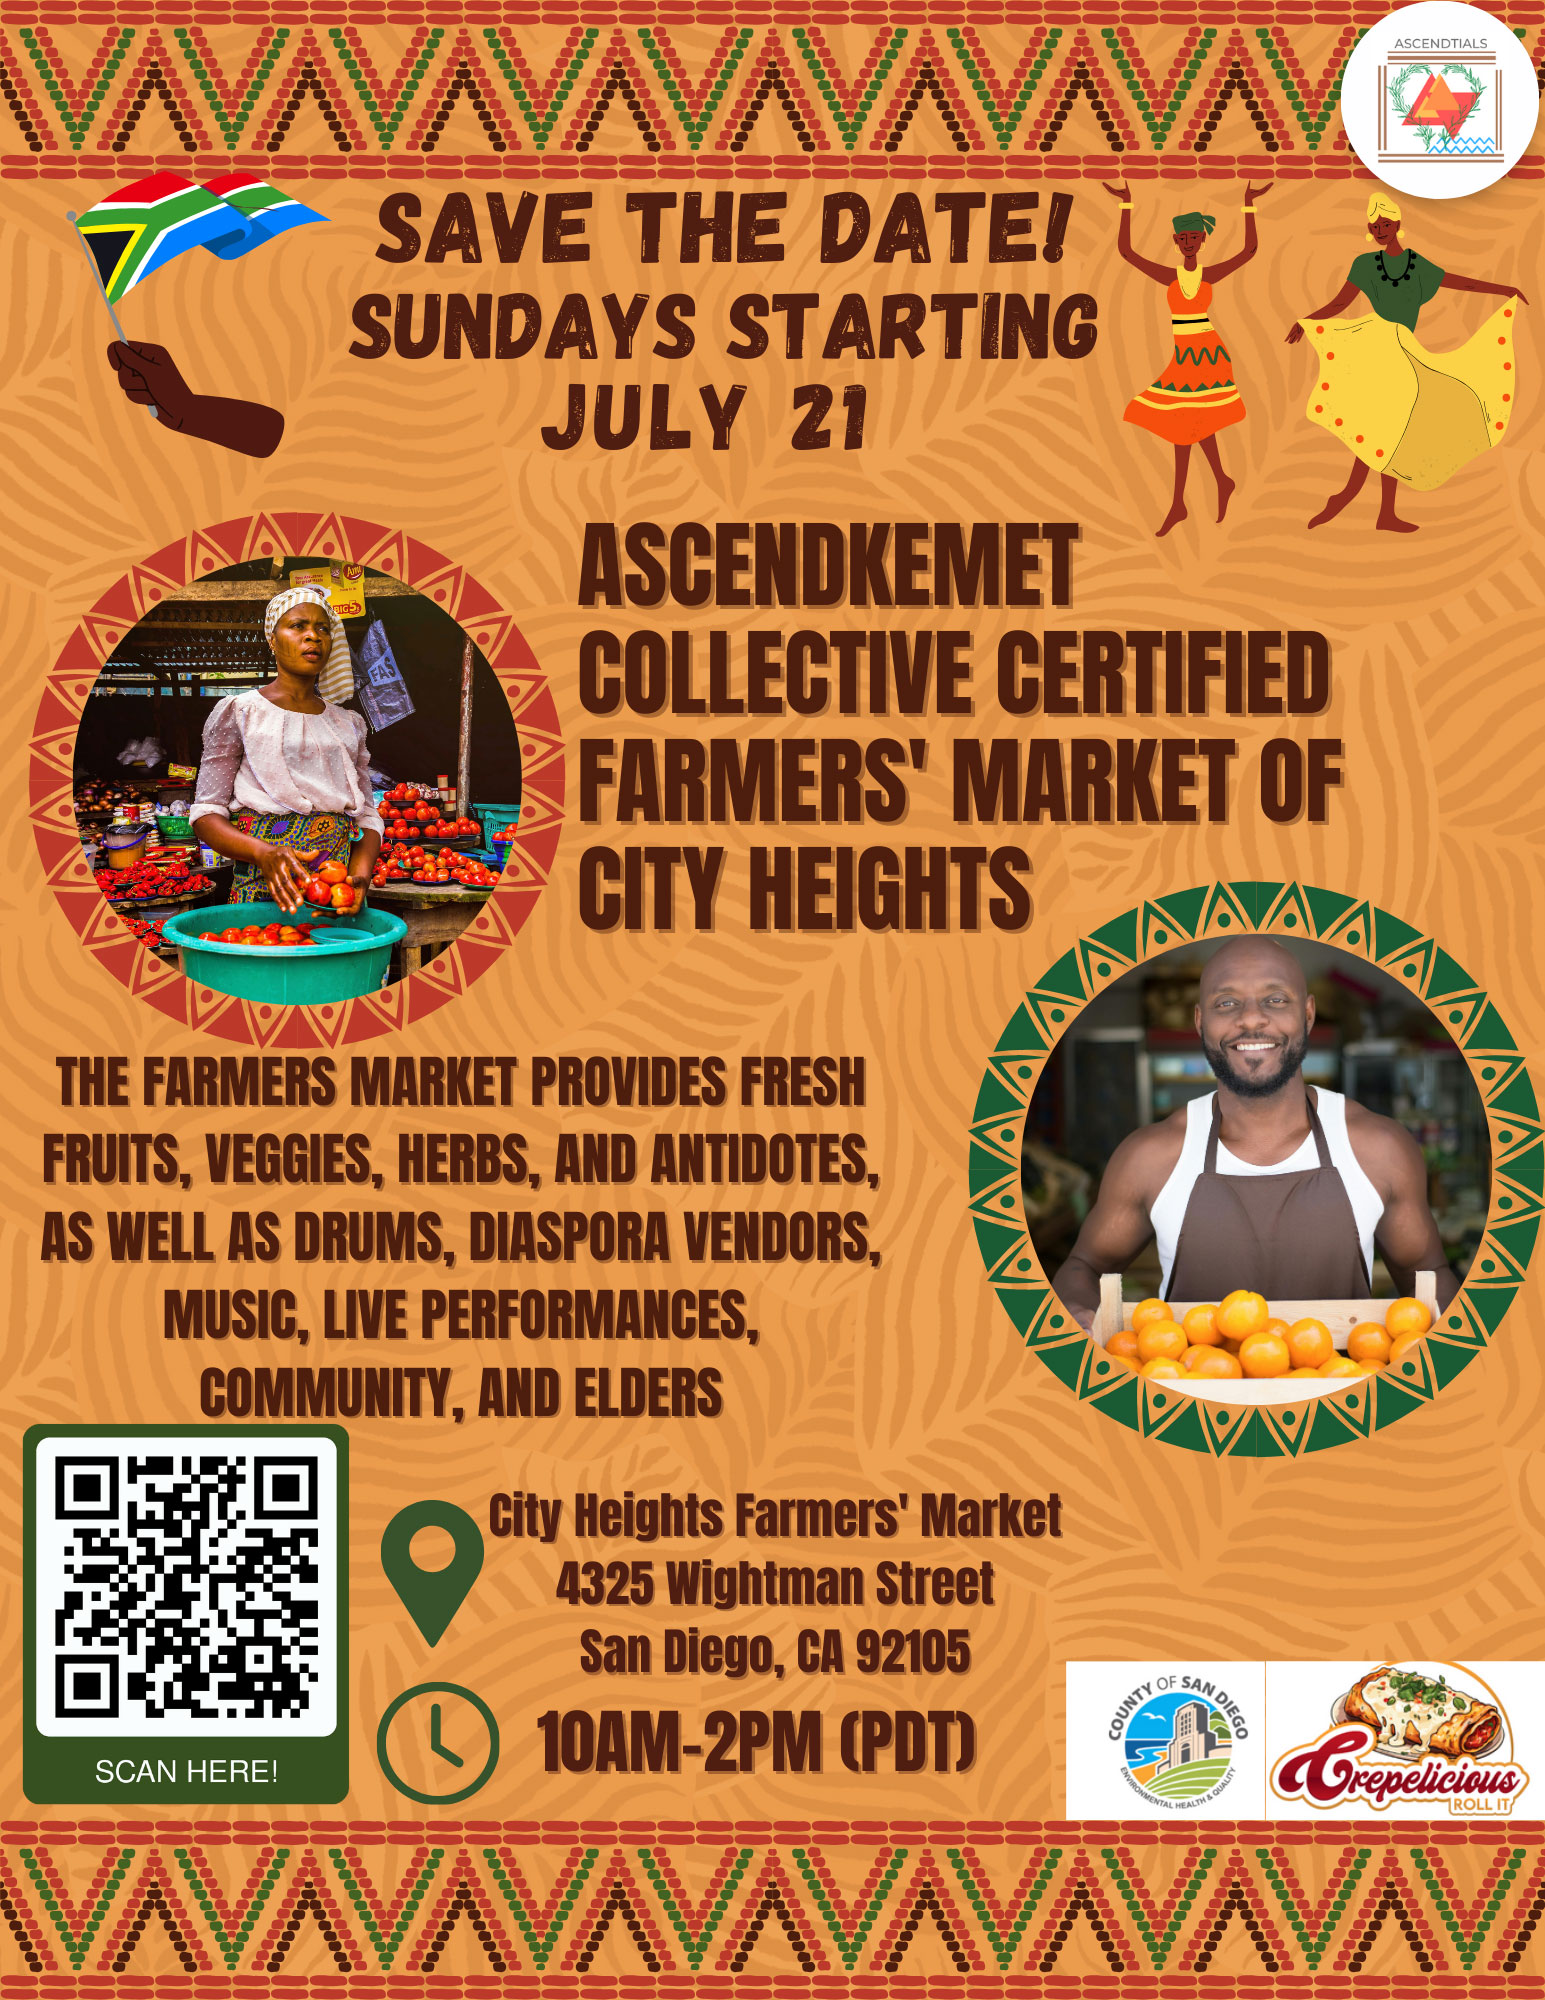 AscendKemet Collective Certified Farmers' Market of City Heights - Sunday July 21